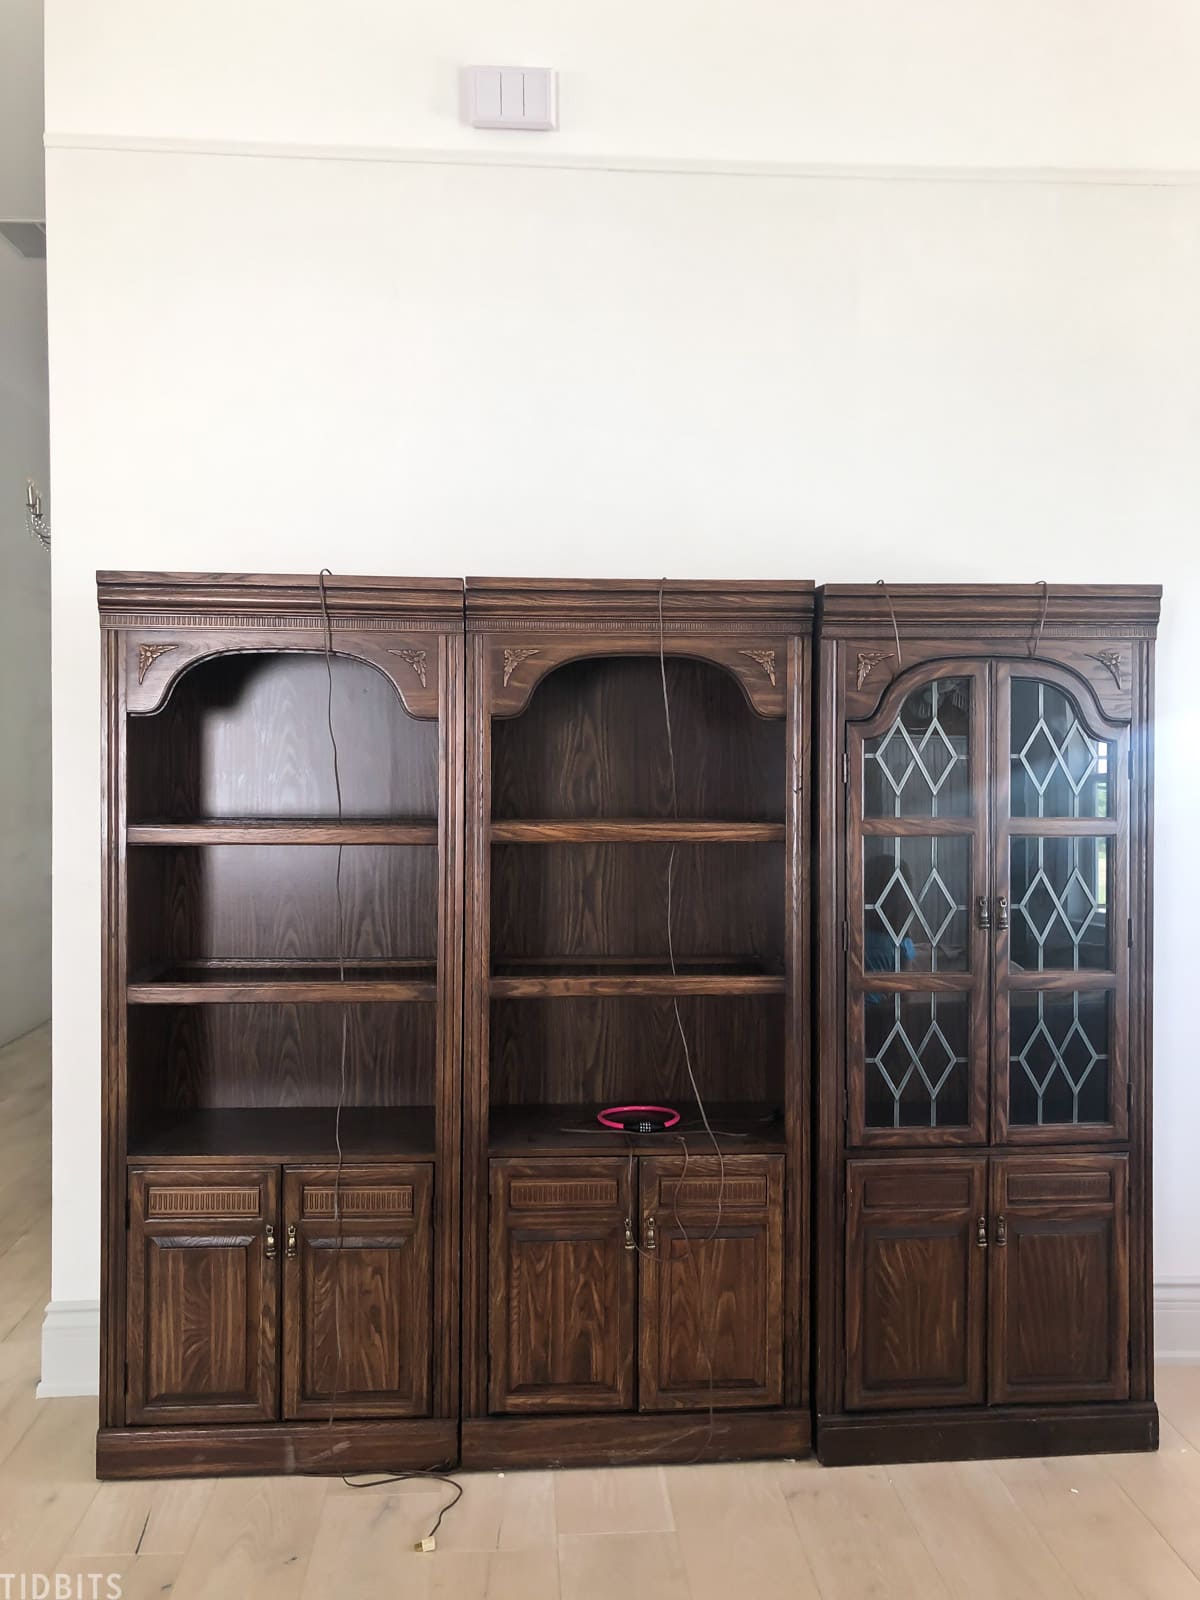 three antique bookshelves placed side by side